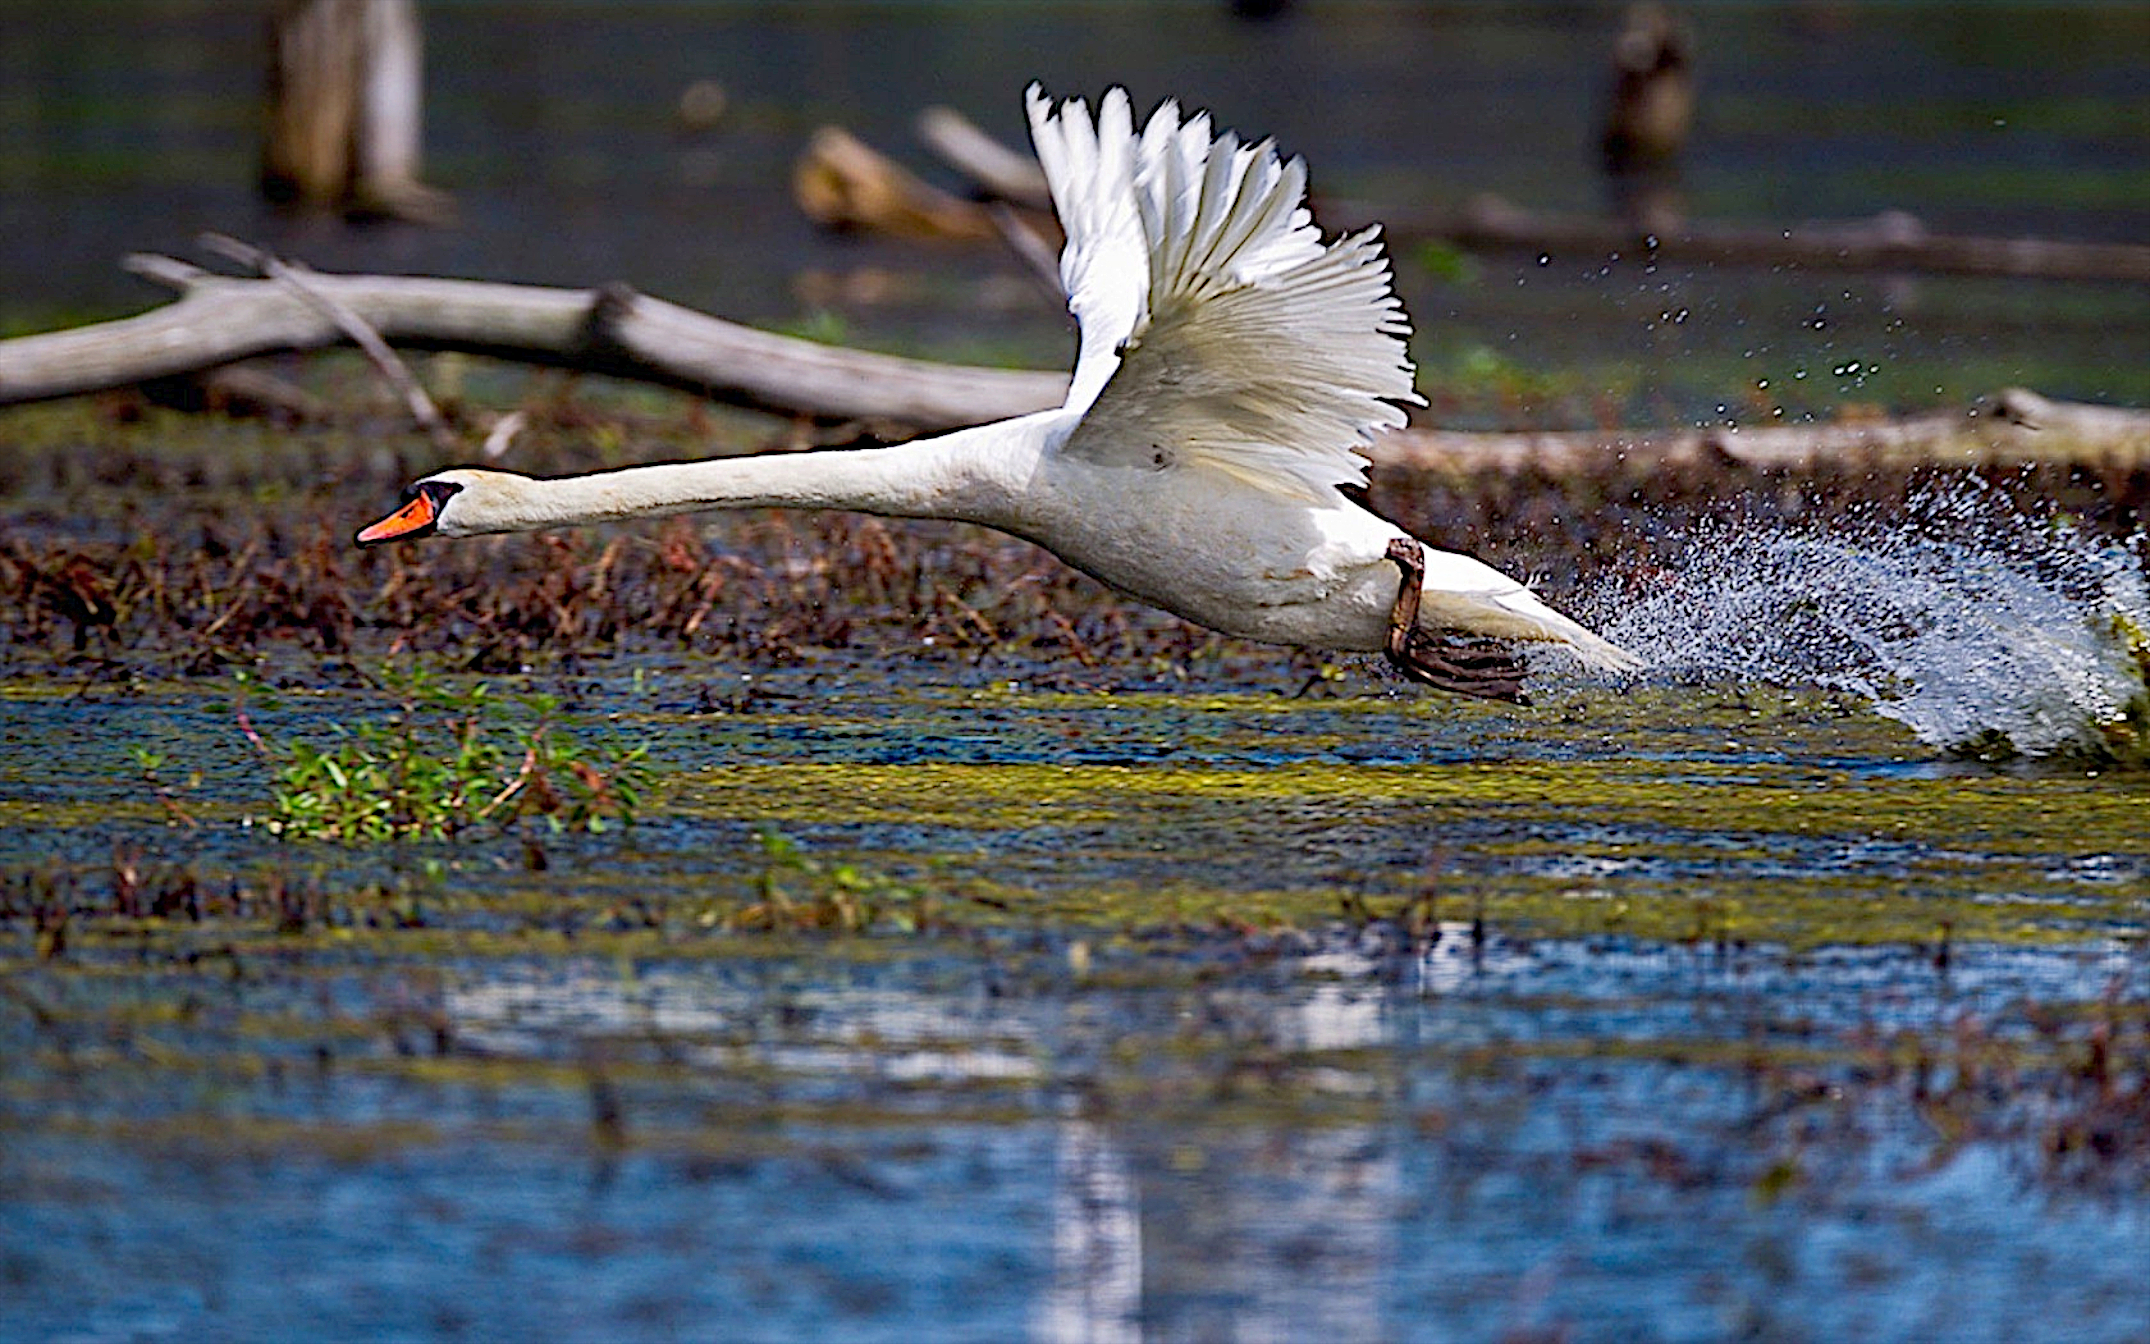 A white swan flies over the water